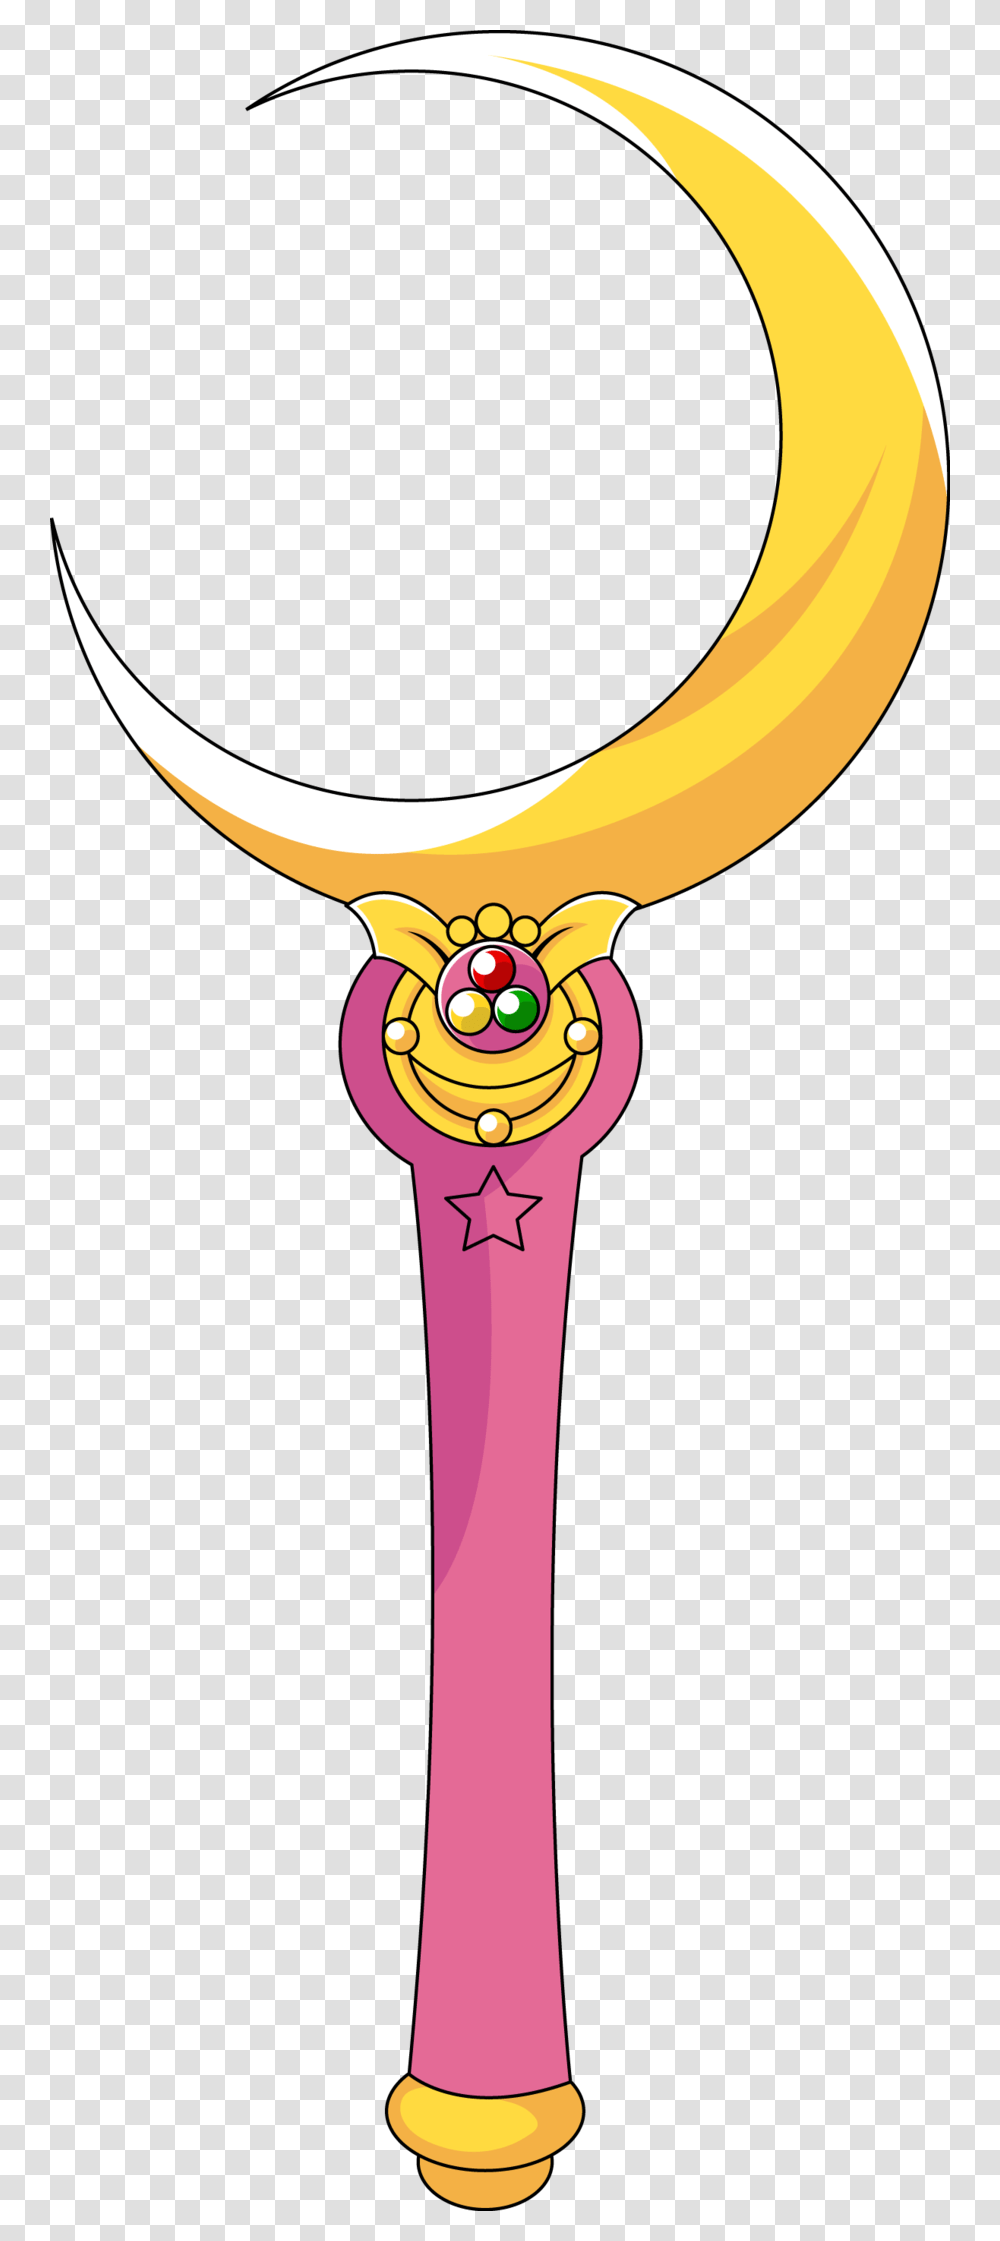 Moon Stick Vector My Sailor Moon Other Characters Addiction, Rattle, Light, Tie, Accessories Transparent Png